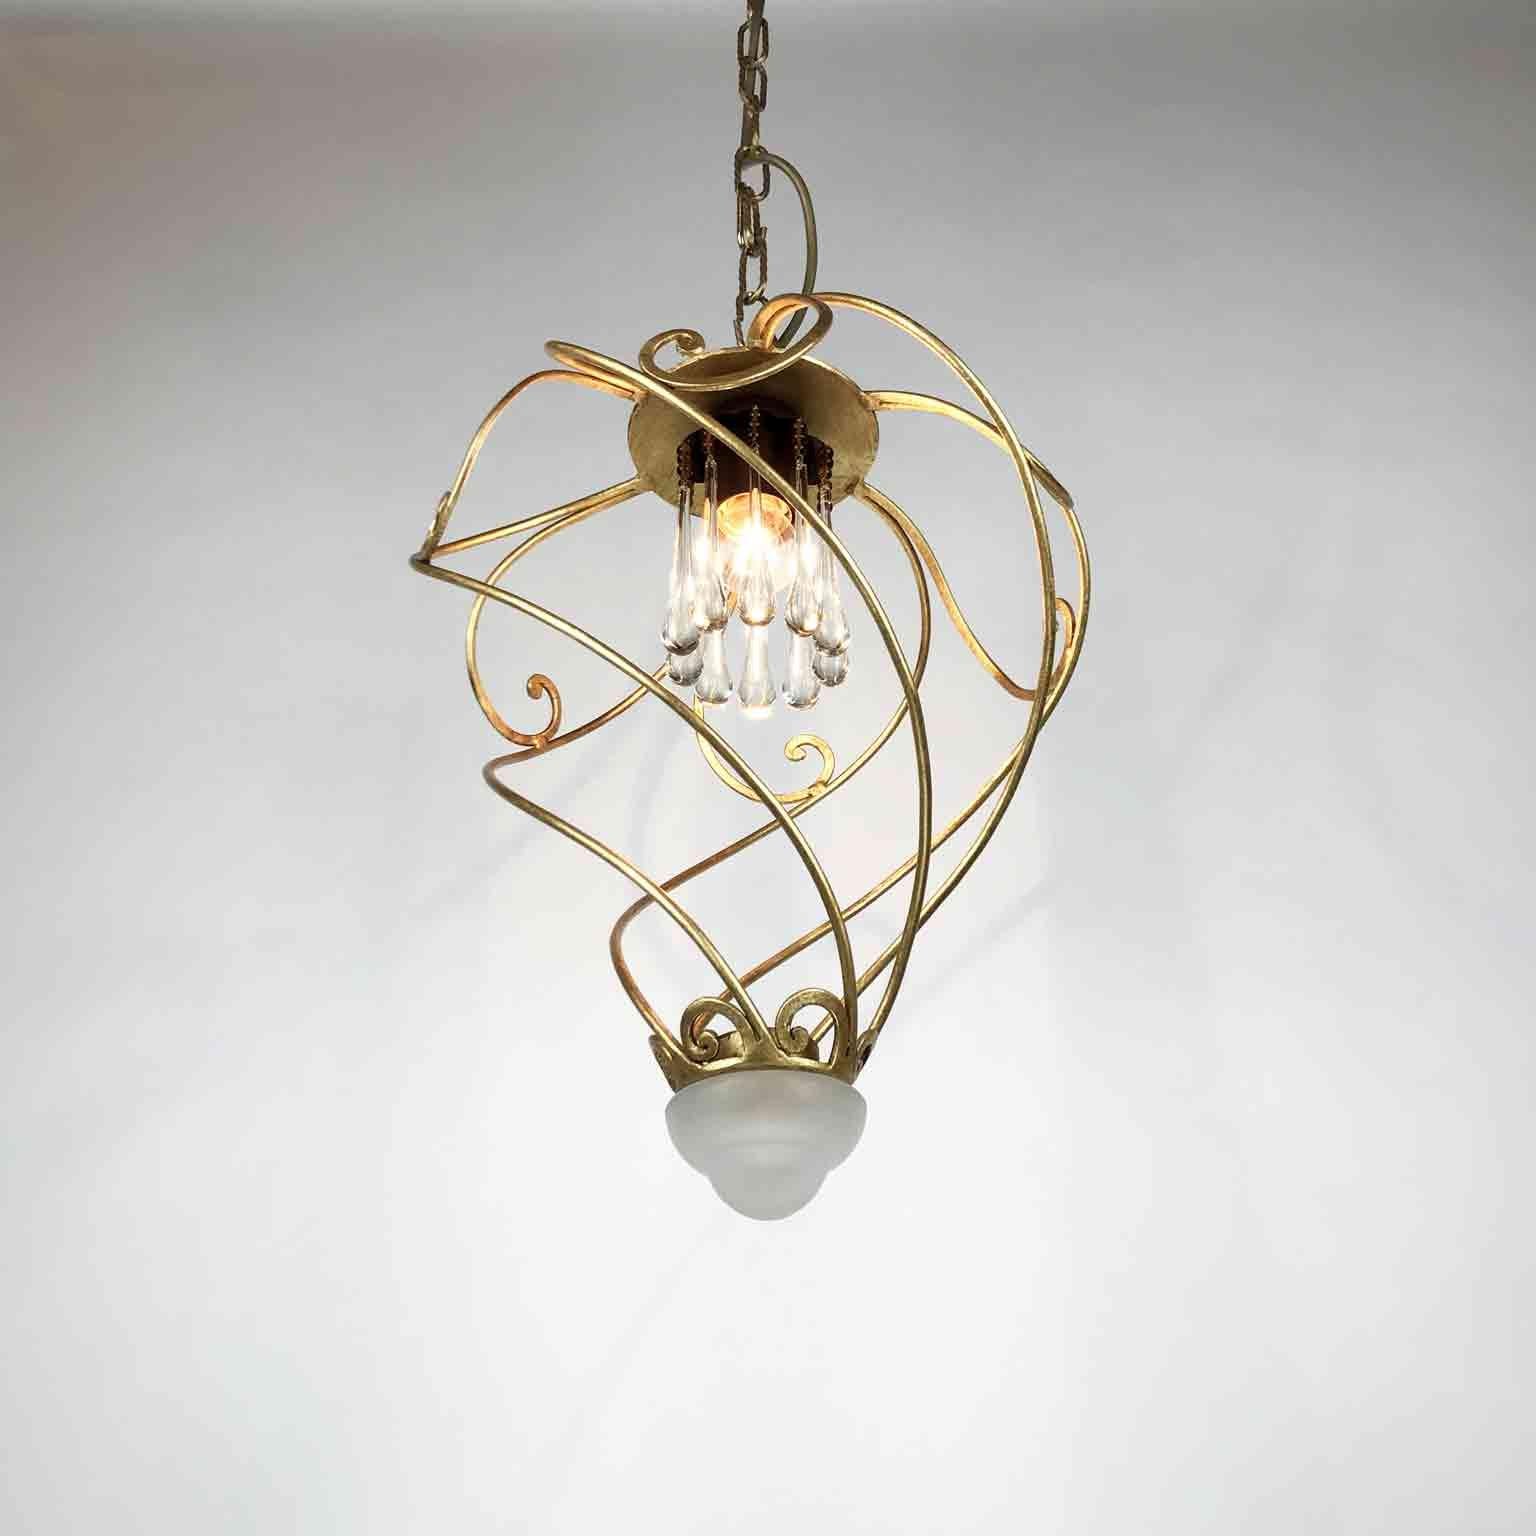 Italian Spiral Shaped Chandelier by Banci Firenze Leaf Gilded Cage 1980s 2